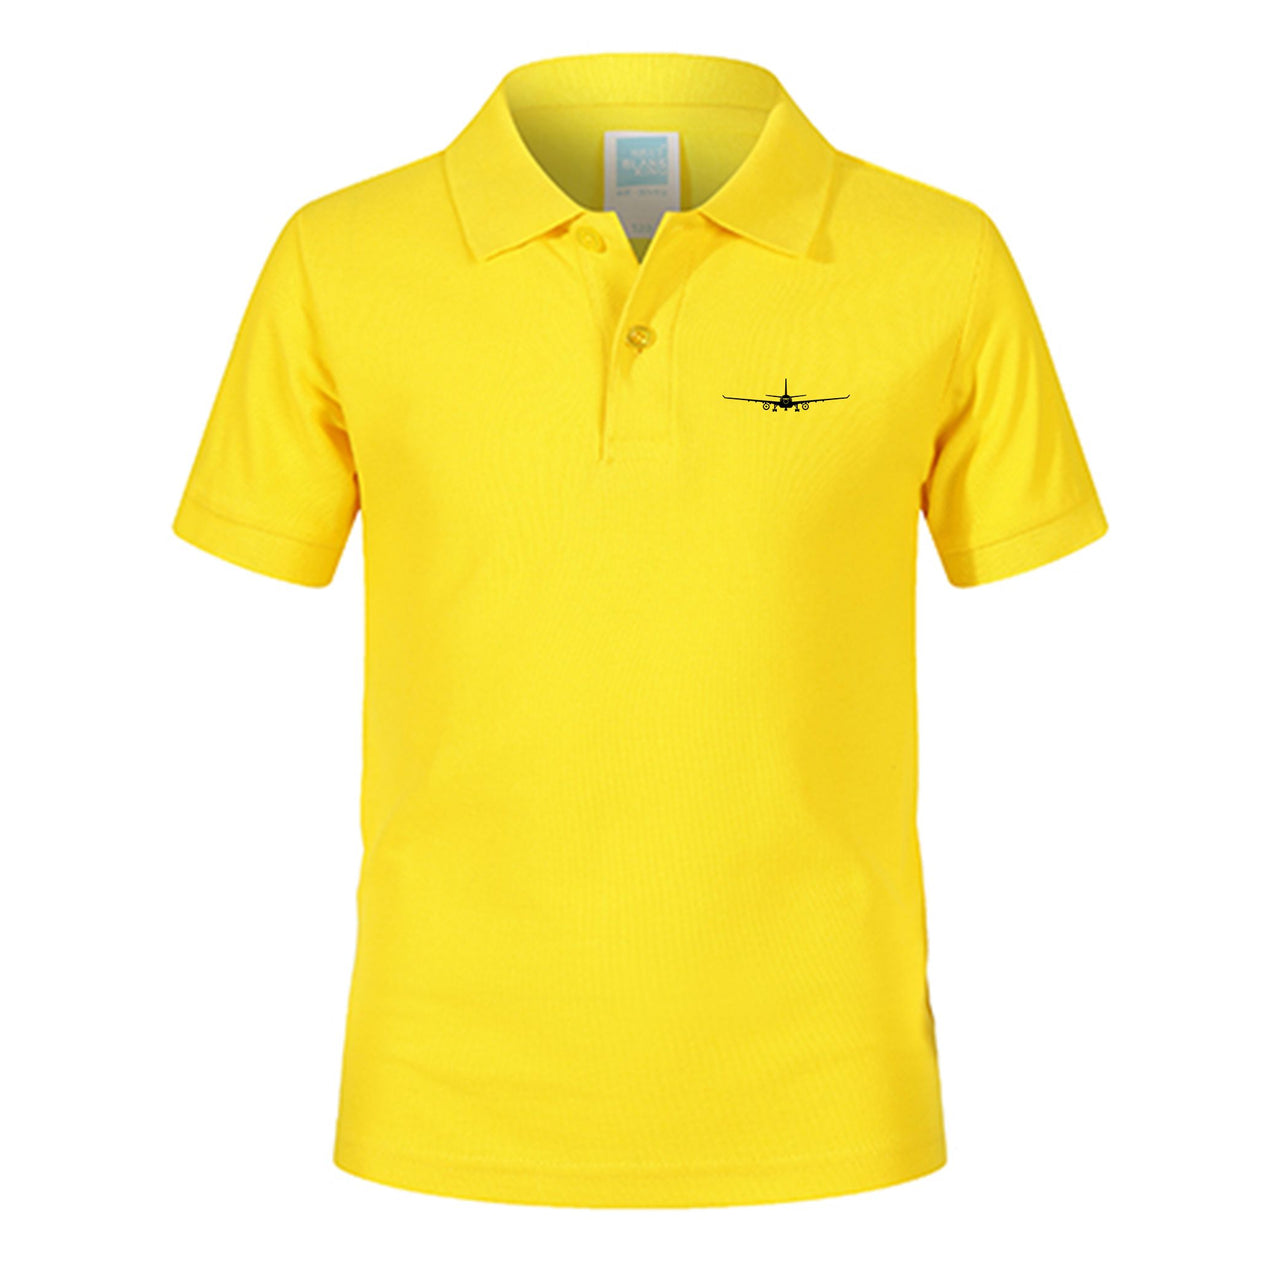 Airbus A330 Silhouette Designed Children Polo T-Shirts